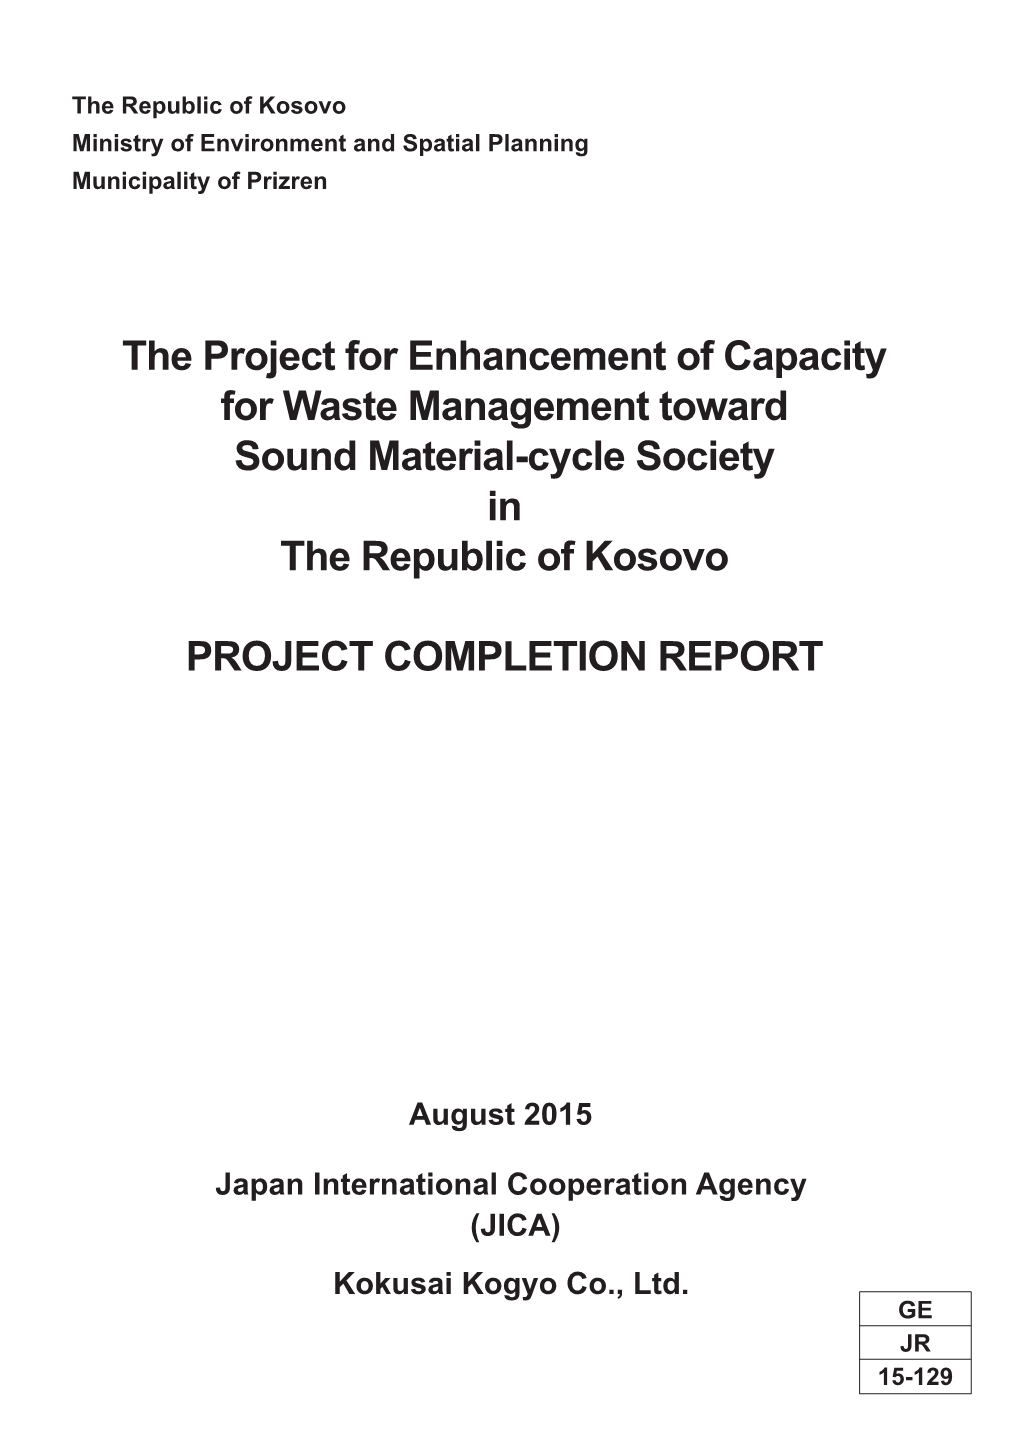 The Project for Enhancement of Capacity for Waste Management Toward Sound Material-Cycle Society in the Republic of Kosovo PROJE